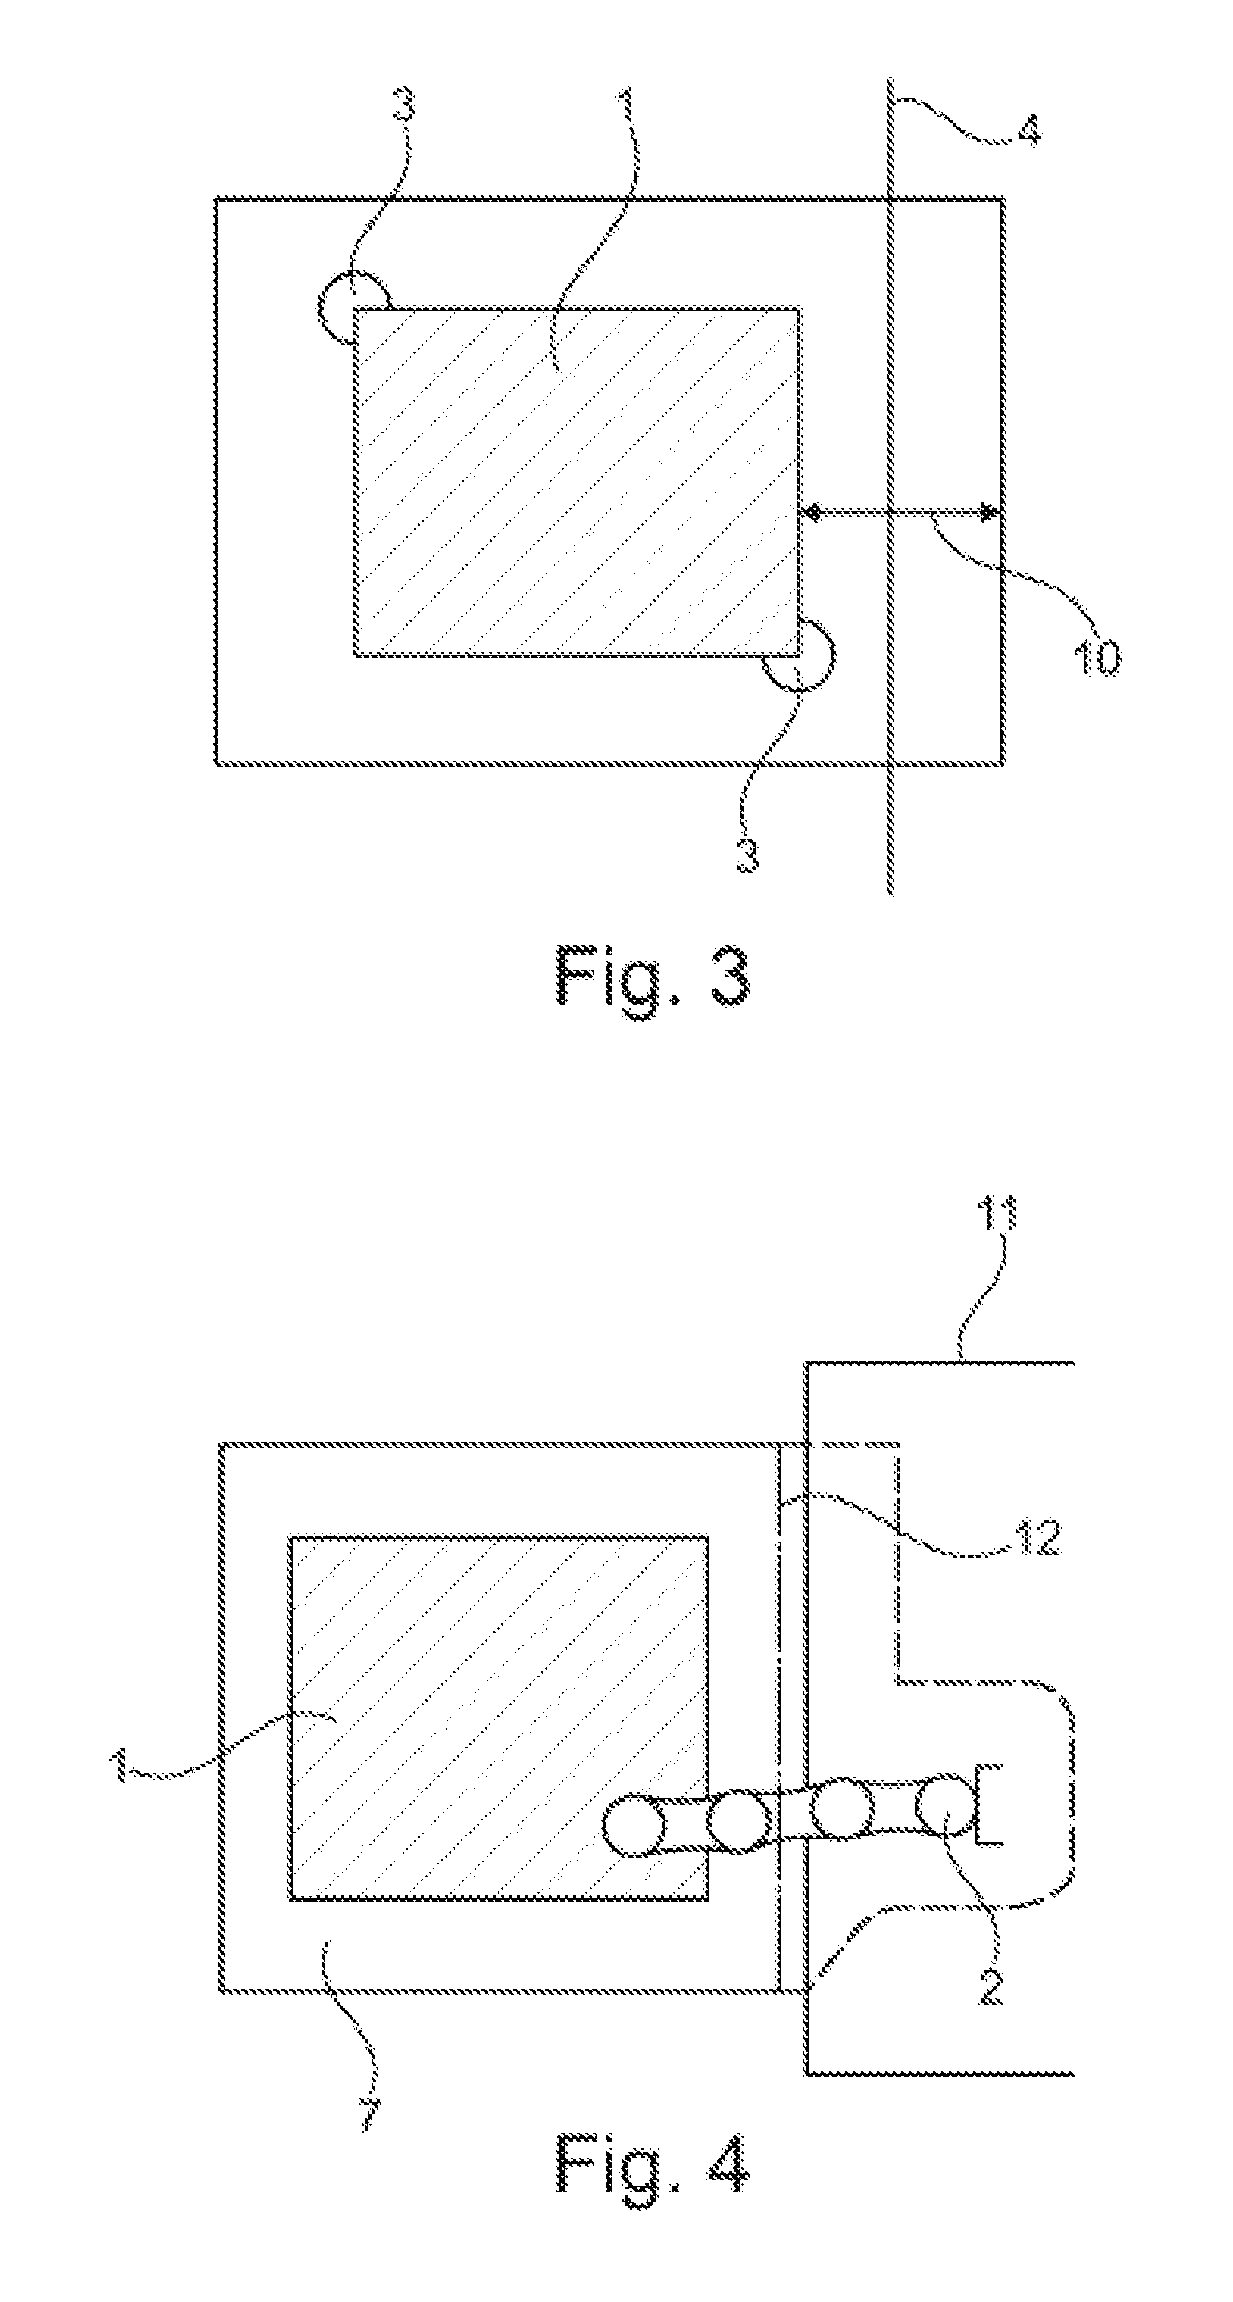 Protective-field adjustment of a manipulator system